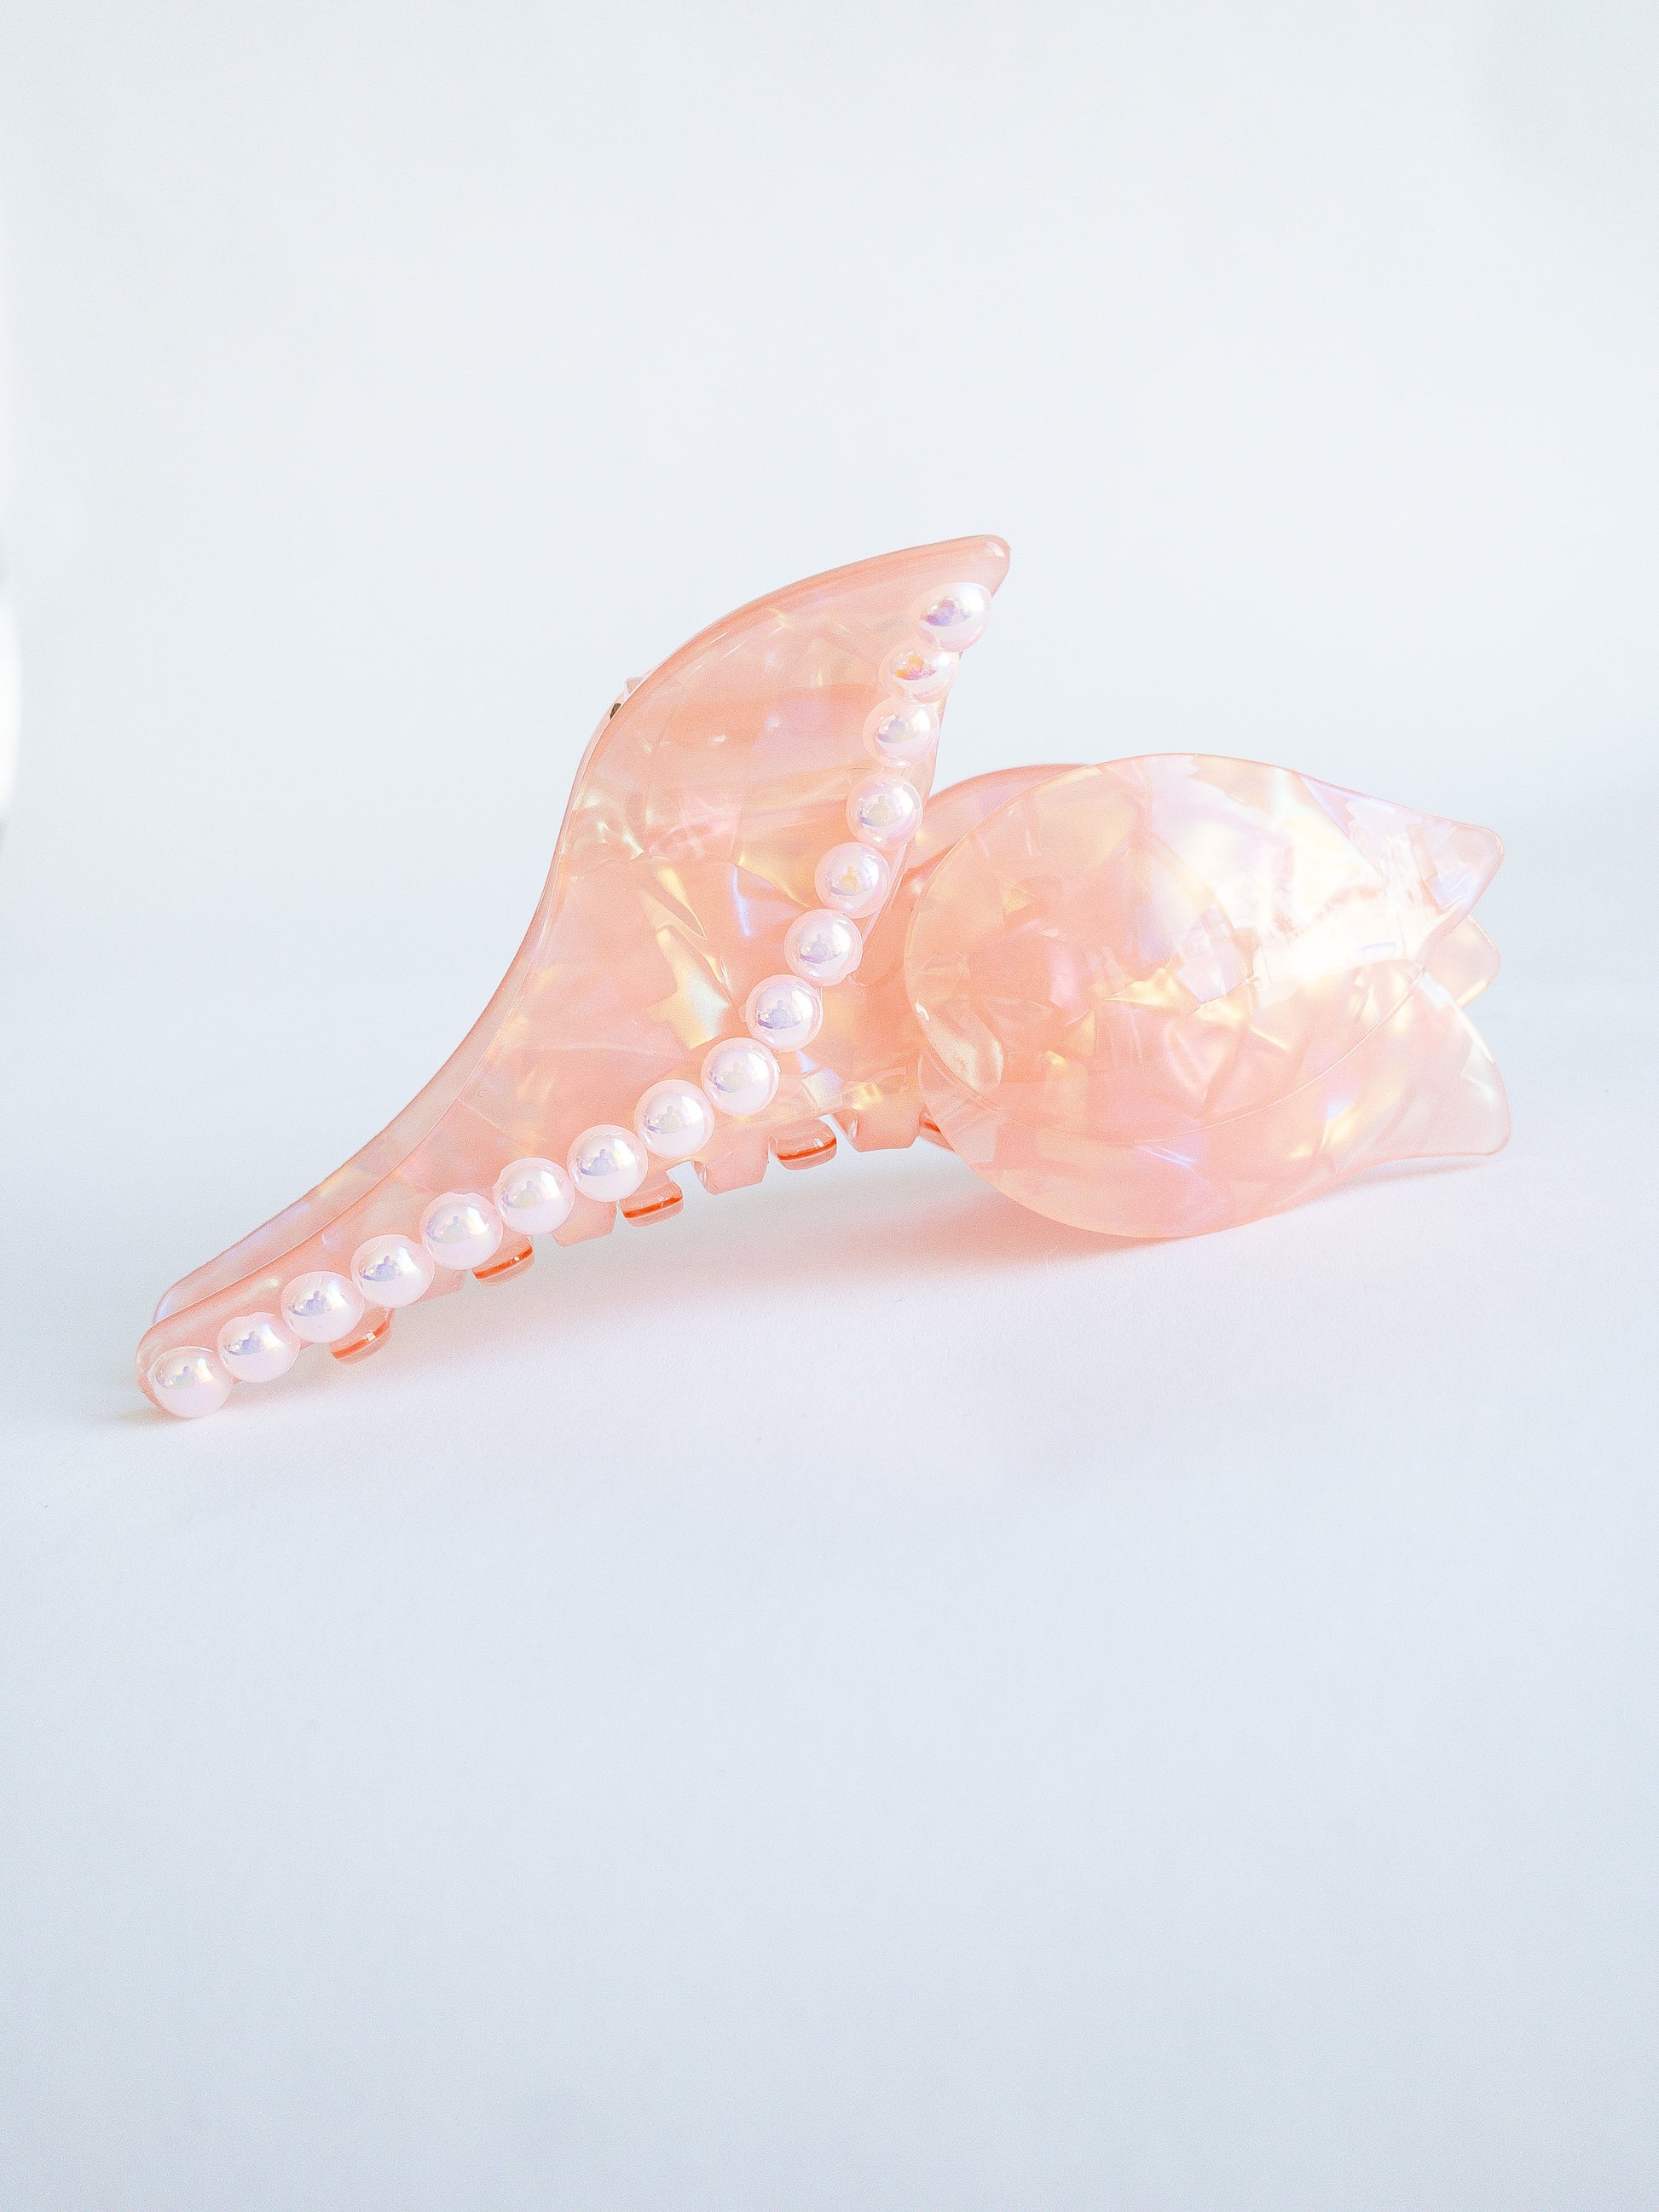 A stunning pearly tulip does exist. This claw is pearlescent all the way around, detailed with small pearls in a curvy beautiful tulip shape.